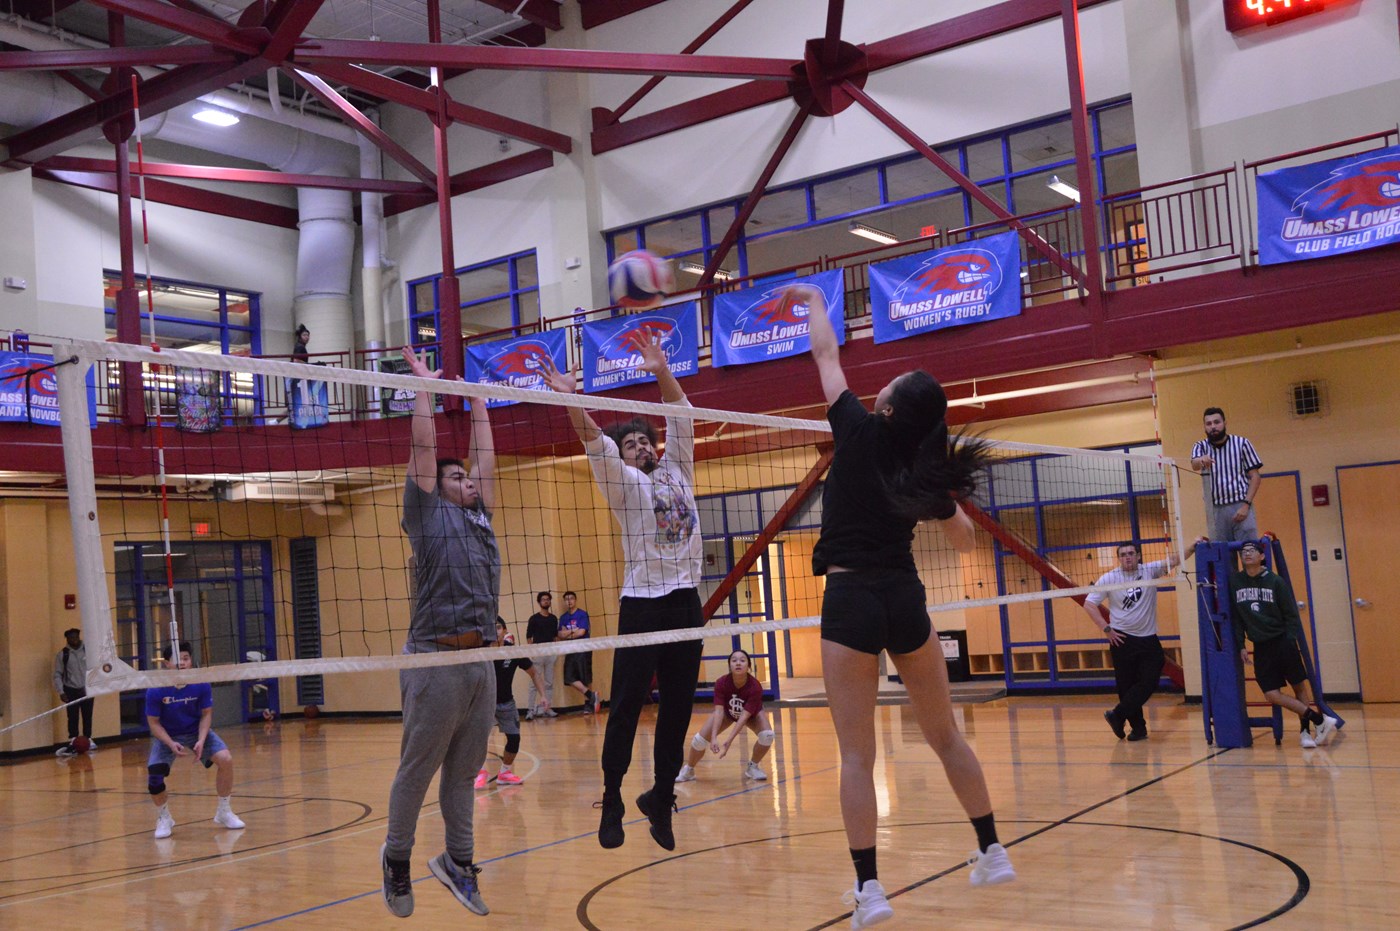 Students playing volleyball inside CRC.